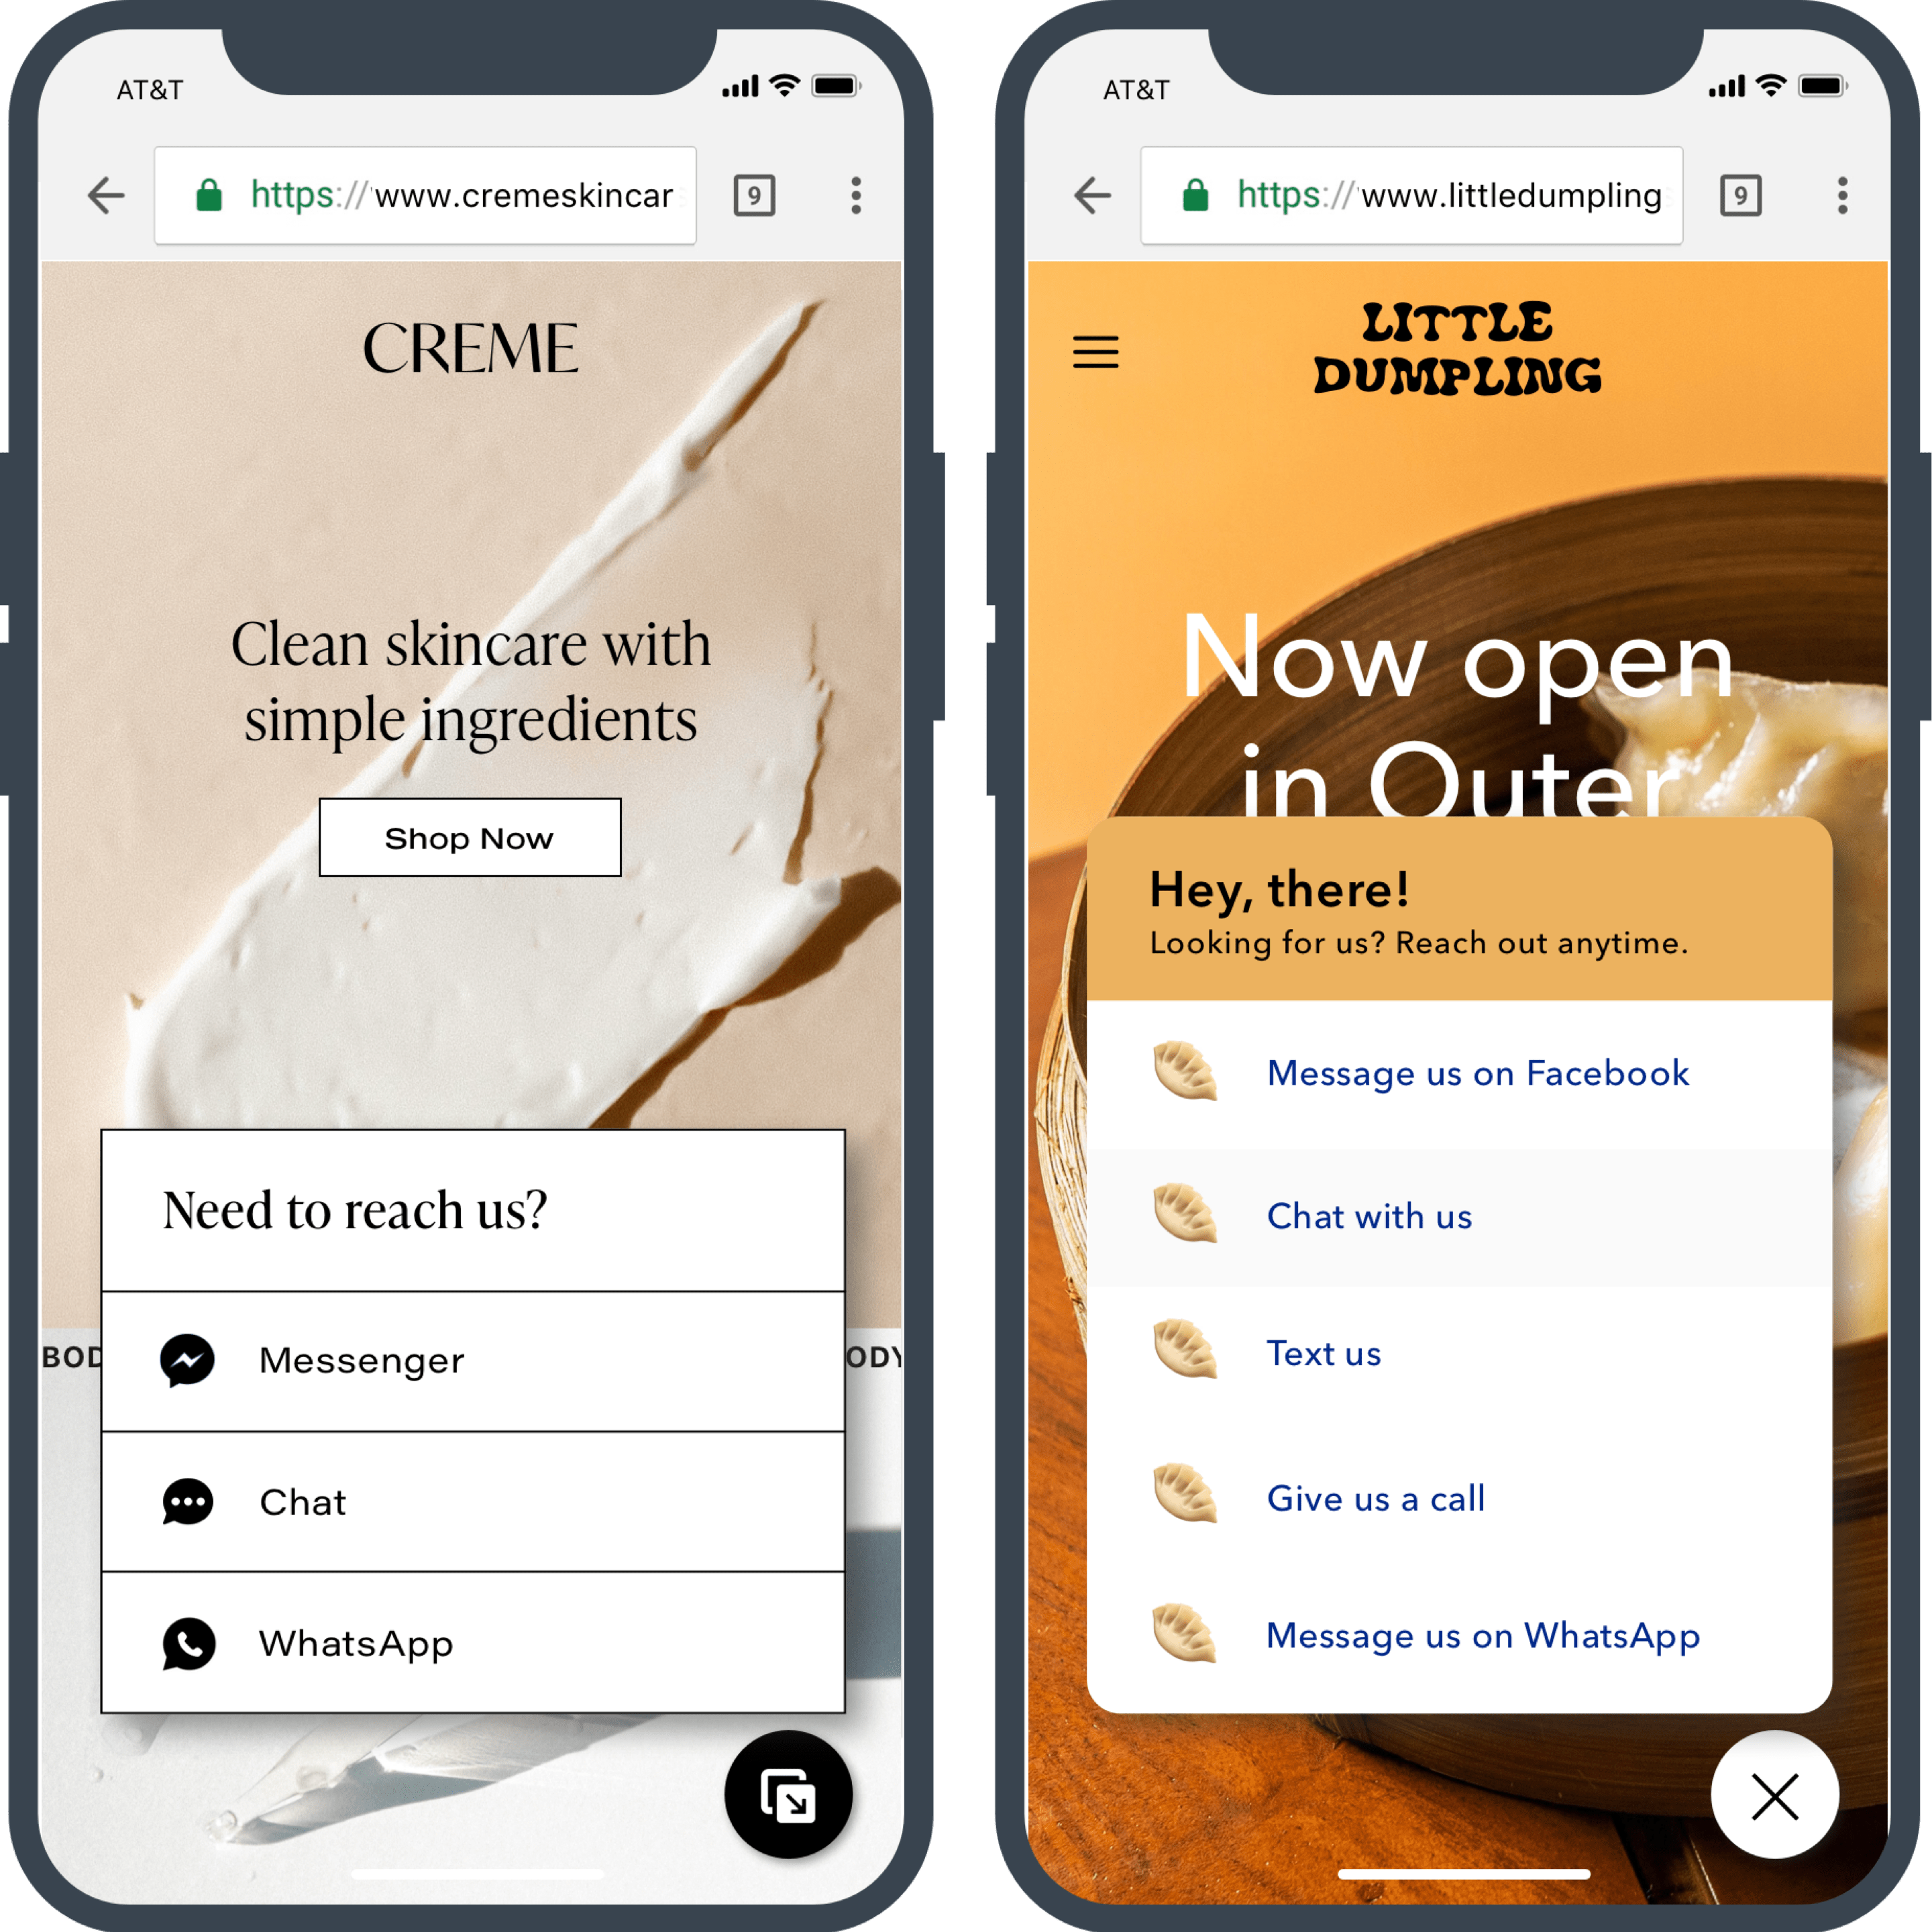 Two mobile phones side by side with websites on each showing a menu of options for contacting the brand.